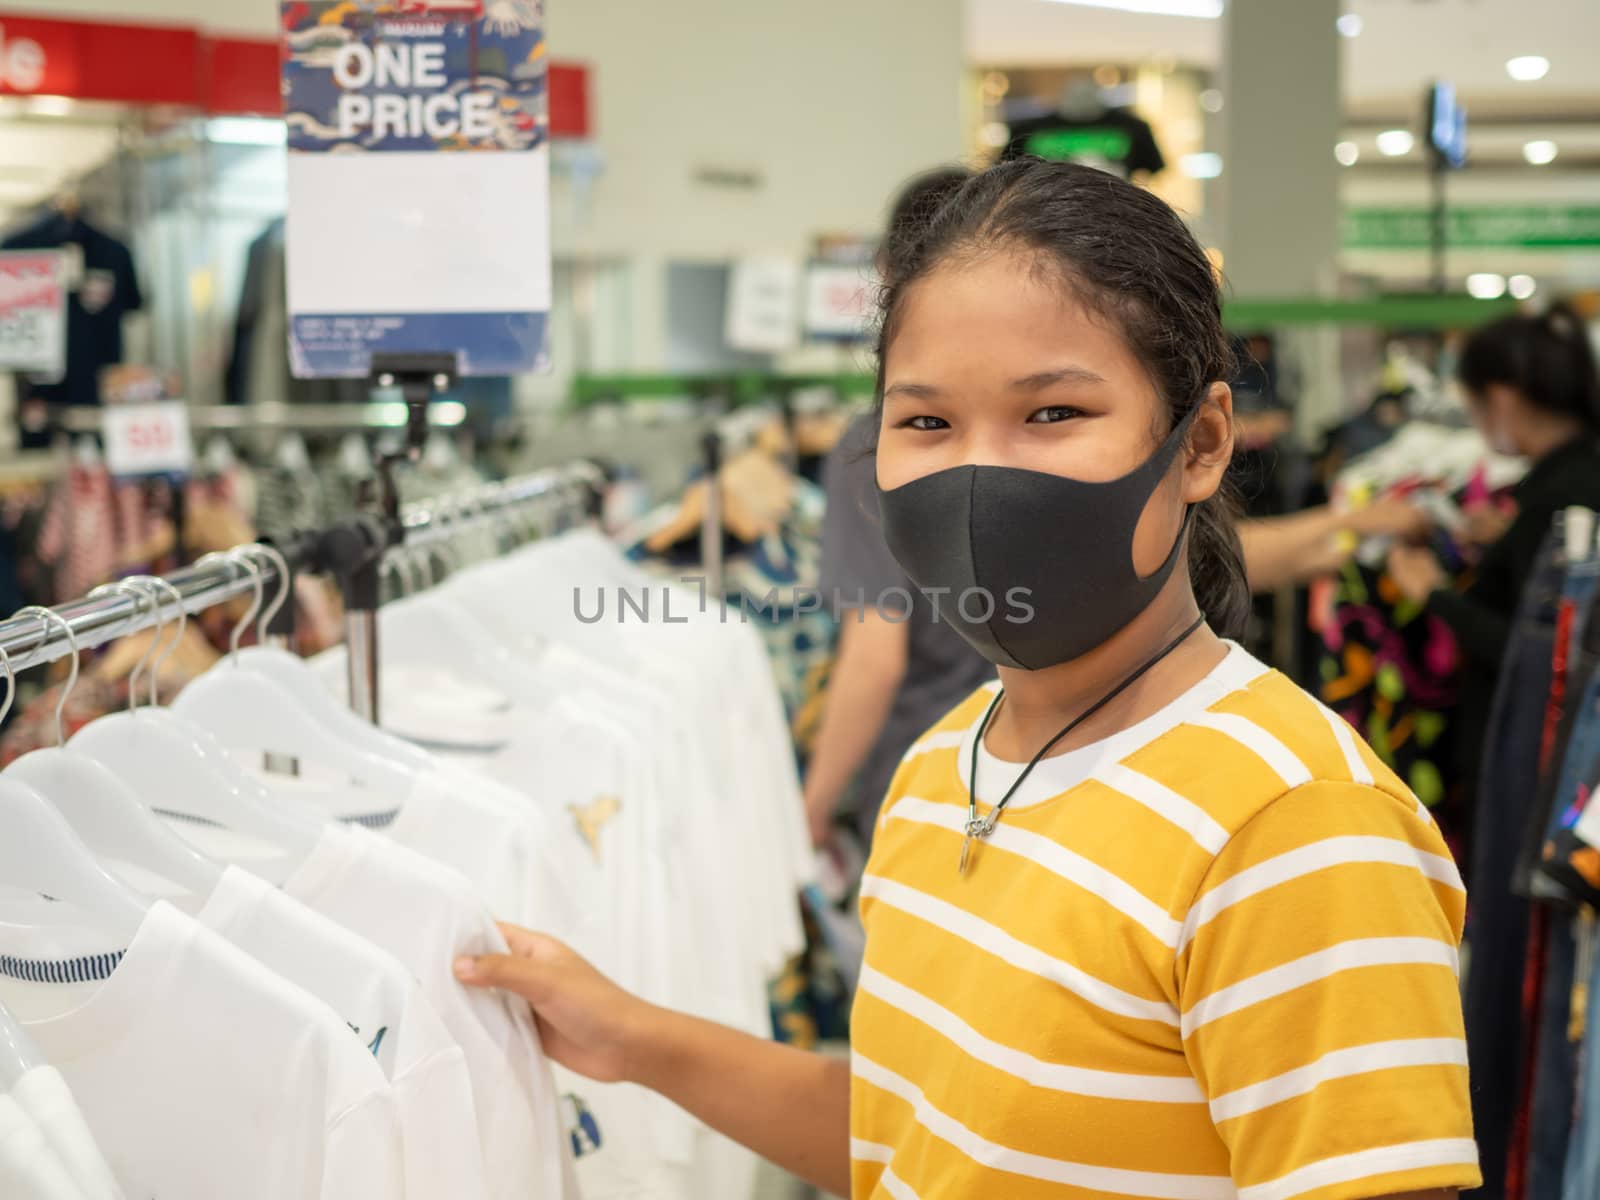 A woman wearing a protective mask While choosing a product In the mall.